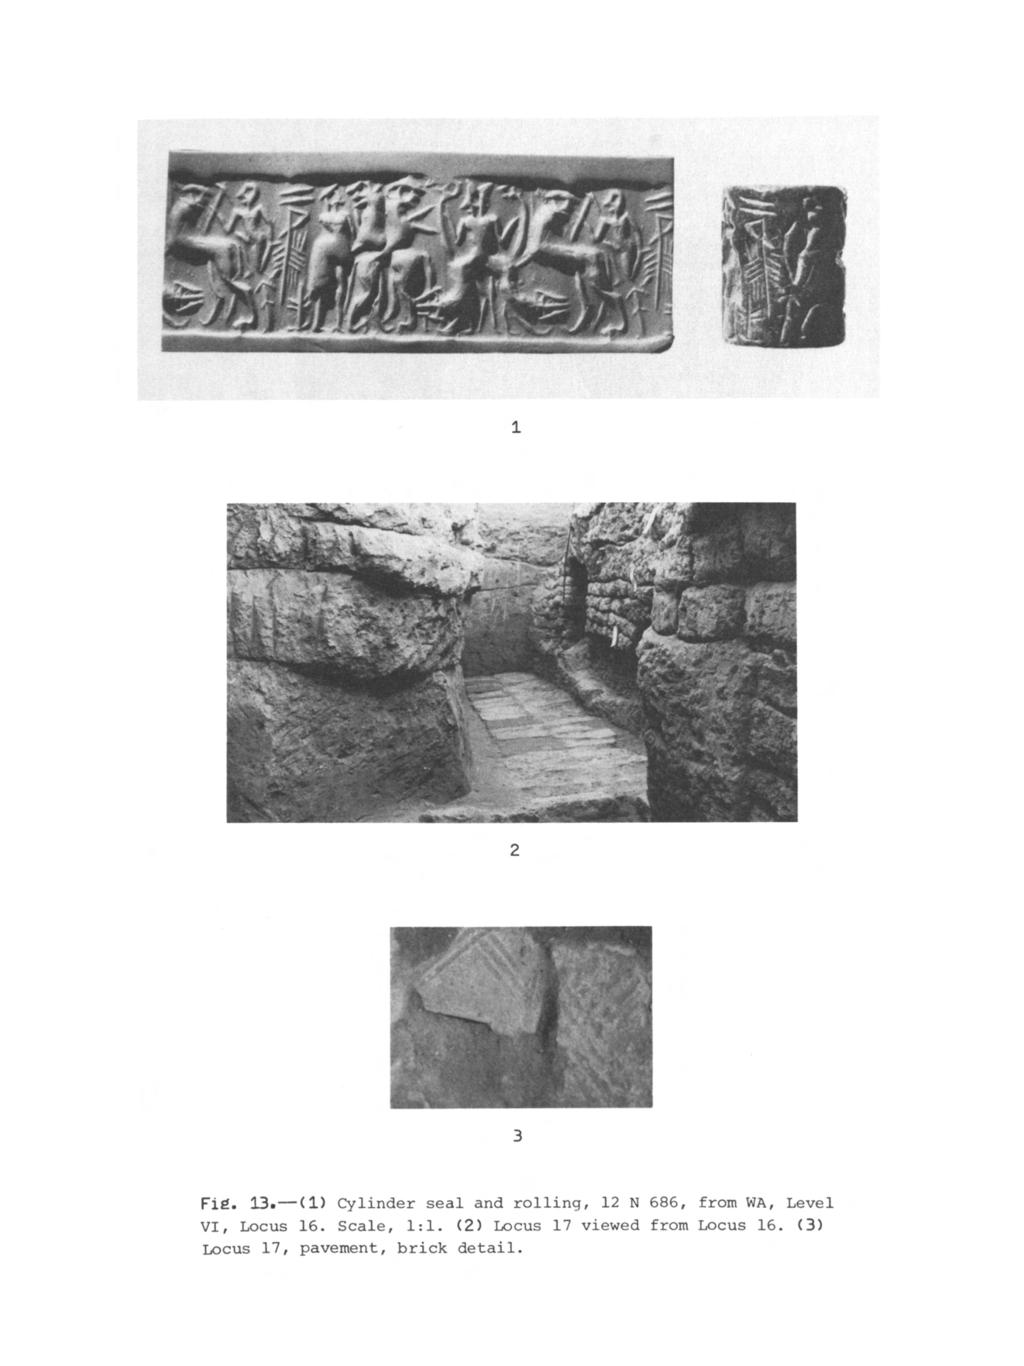 1 Fig. 13.-(1) Cylinder seal and rolling, 12 N 686, from WA, Level VI, Locus 16.